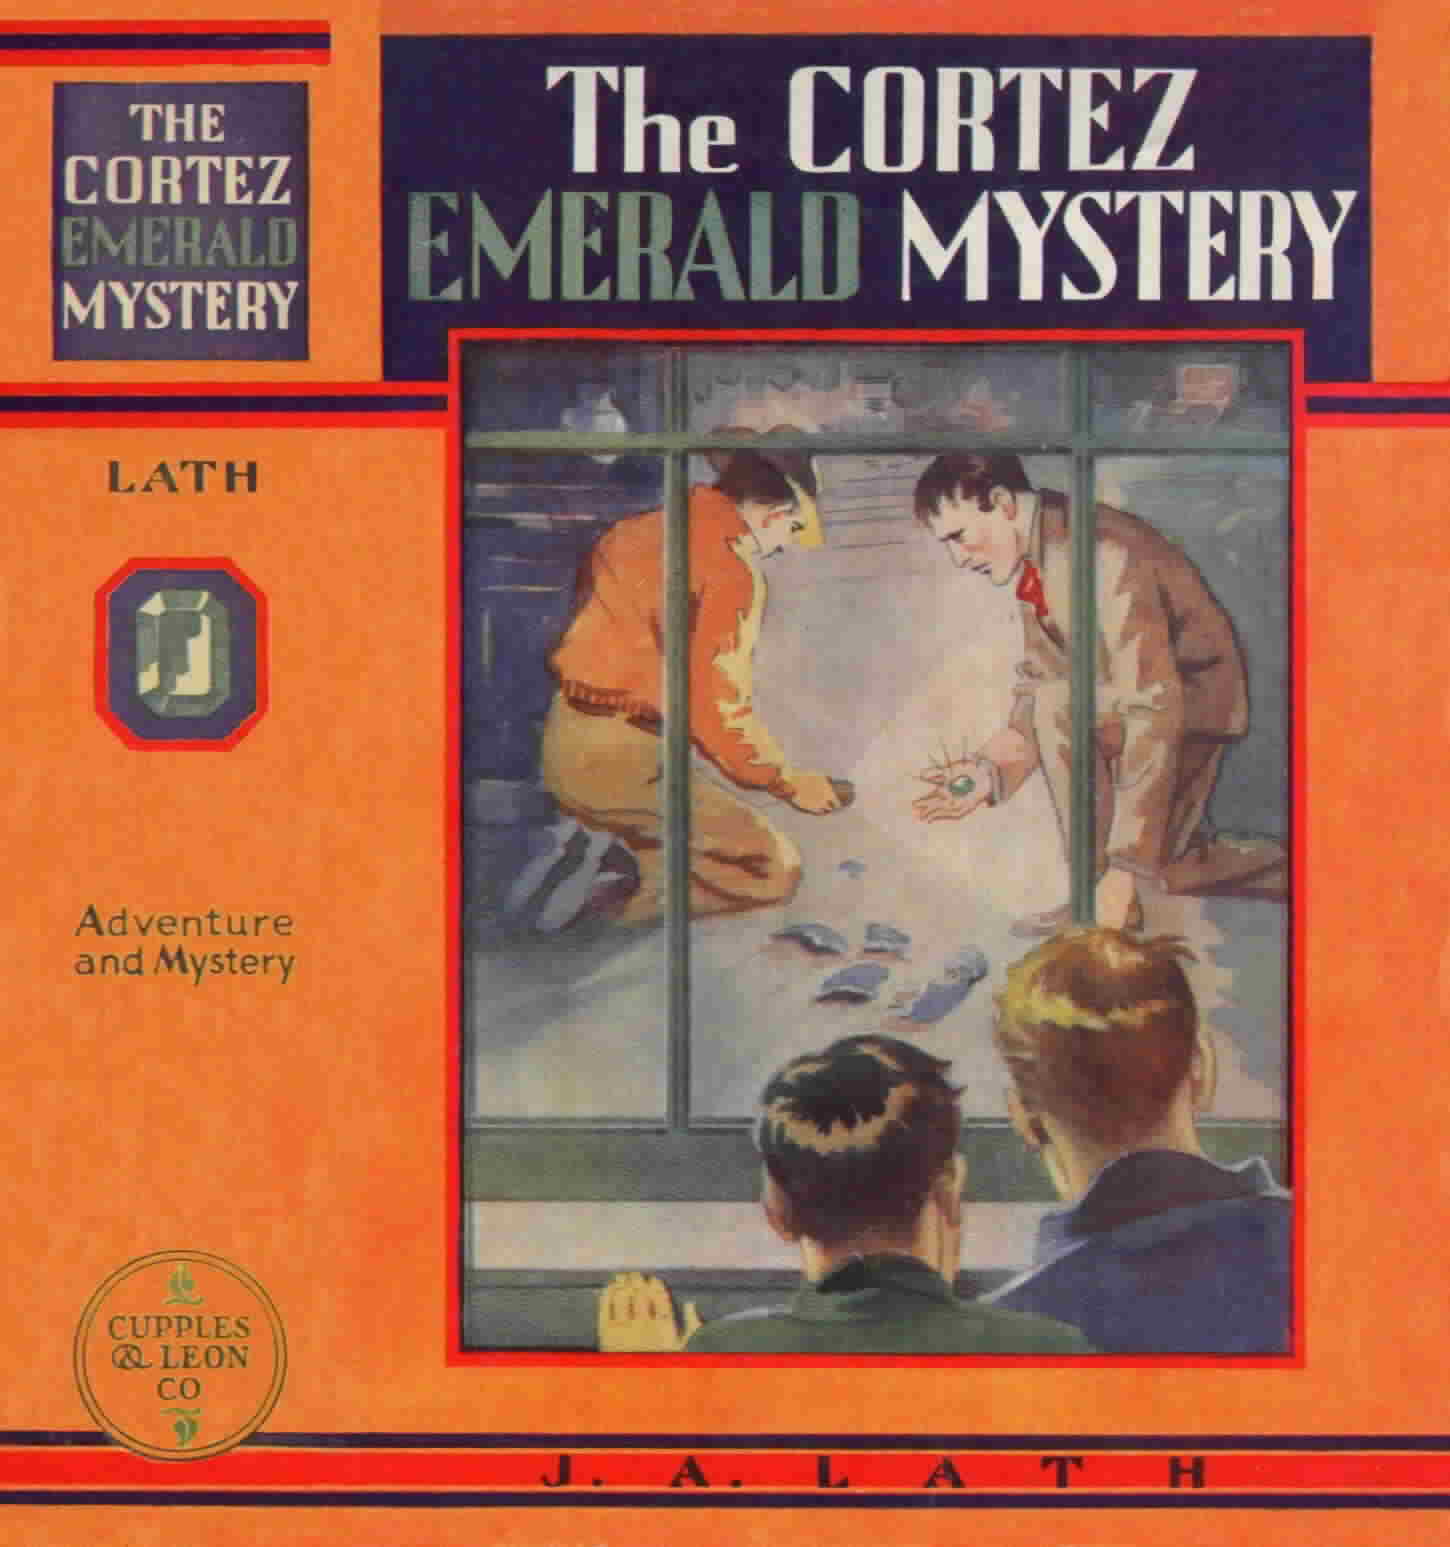 'The Cortez Emerald Mystery' by J. A. Lath